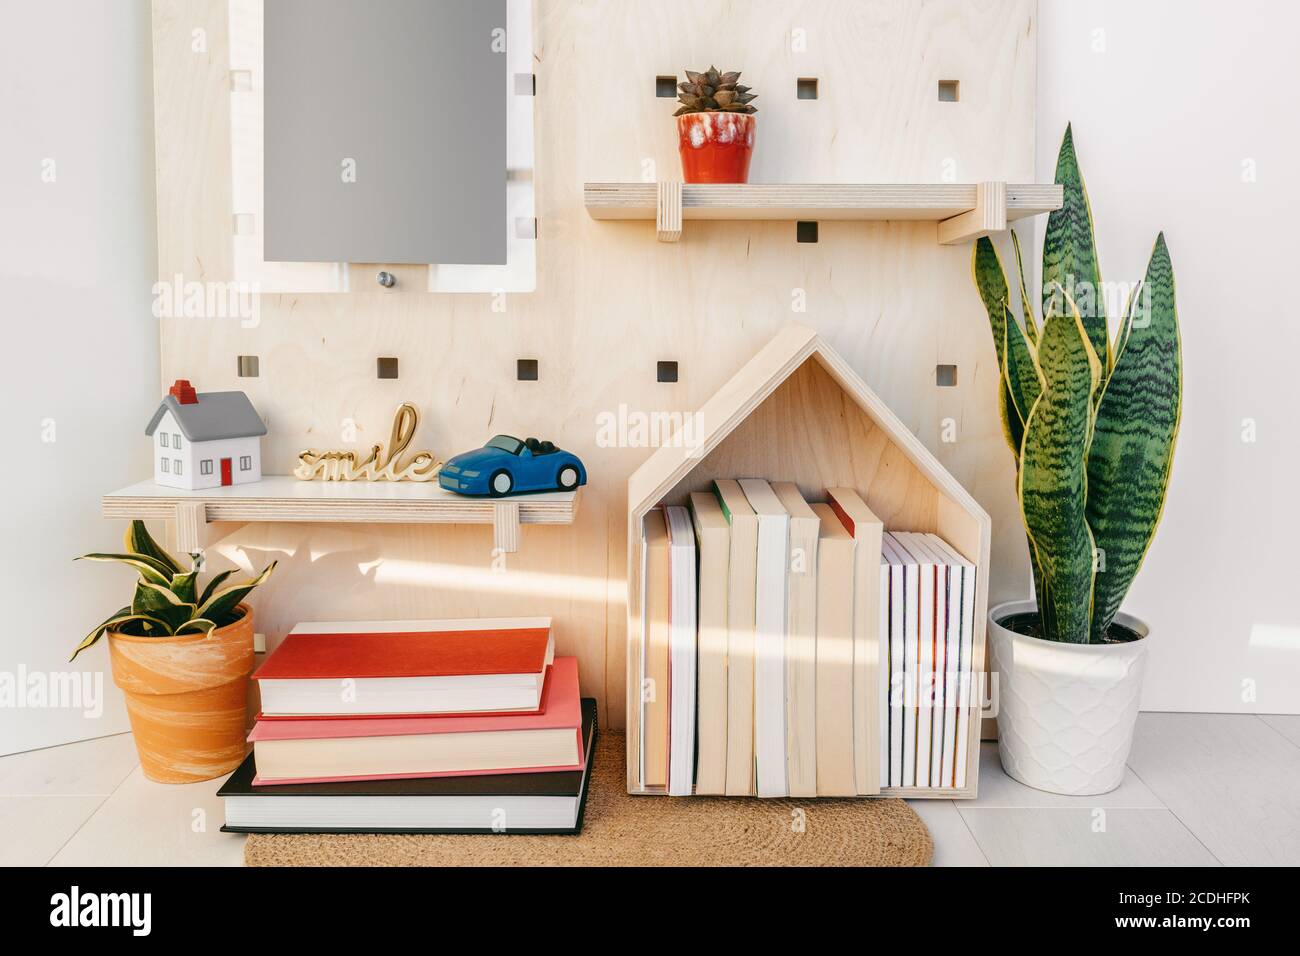 Home decor cozy wall shelves with books and toy car. New house decoration concept. Plants, wooden shelf, happy sign Stock Photo